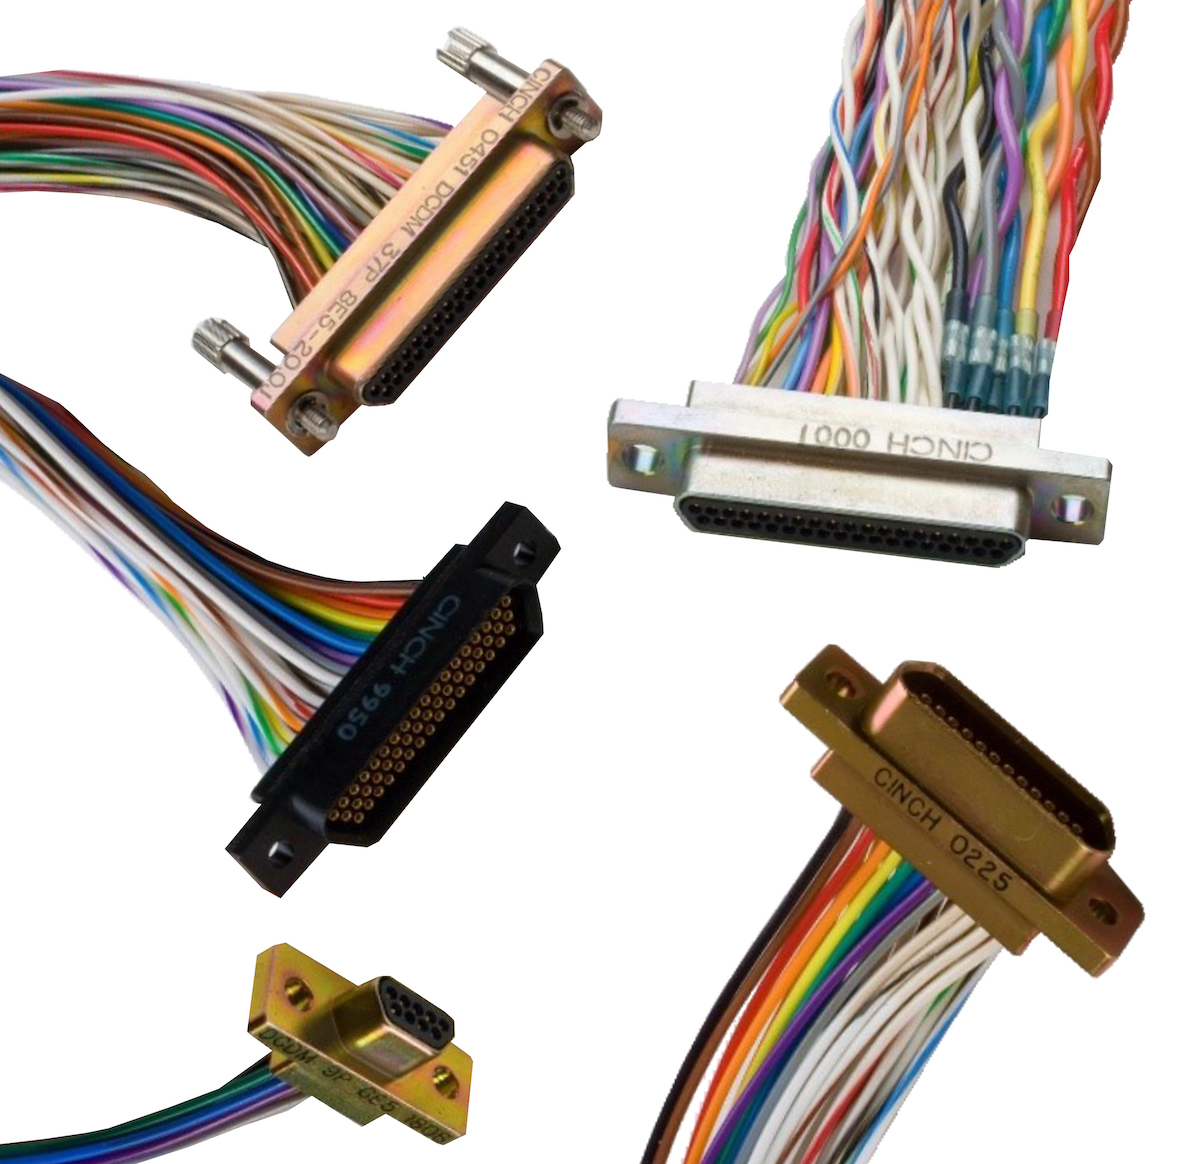 high-reliability connector products from Cinch